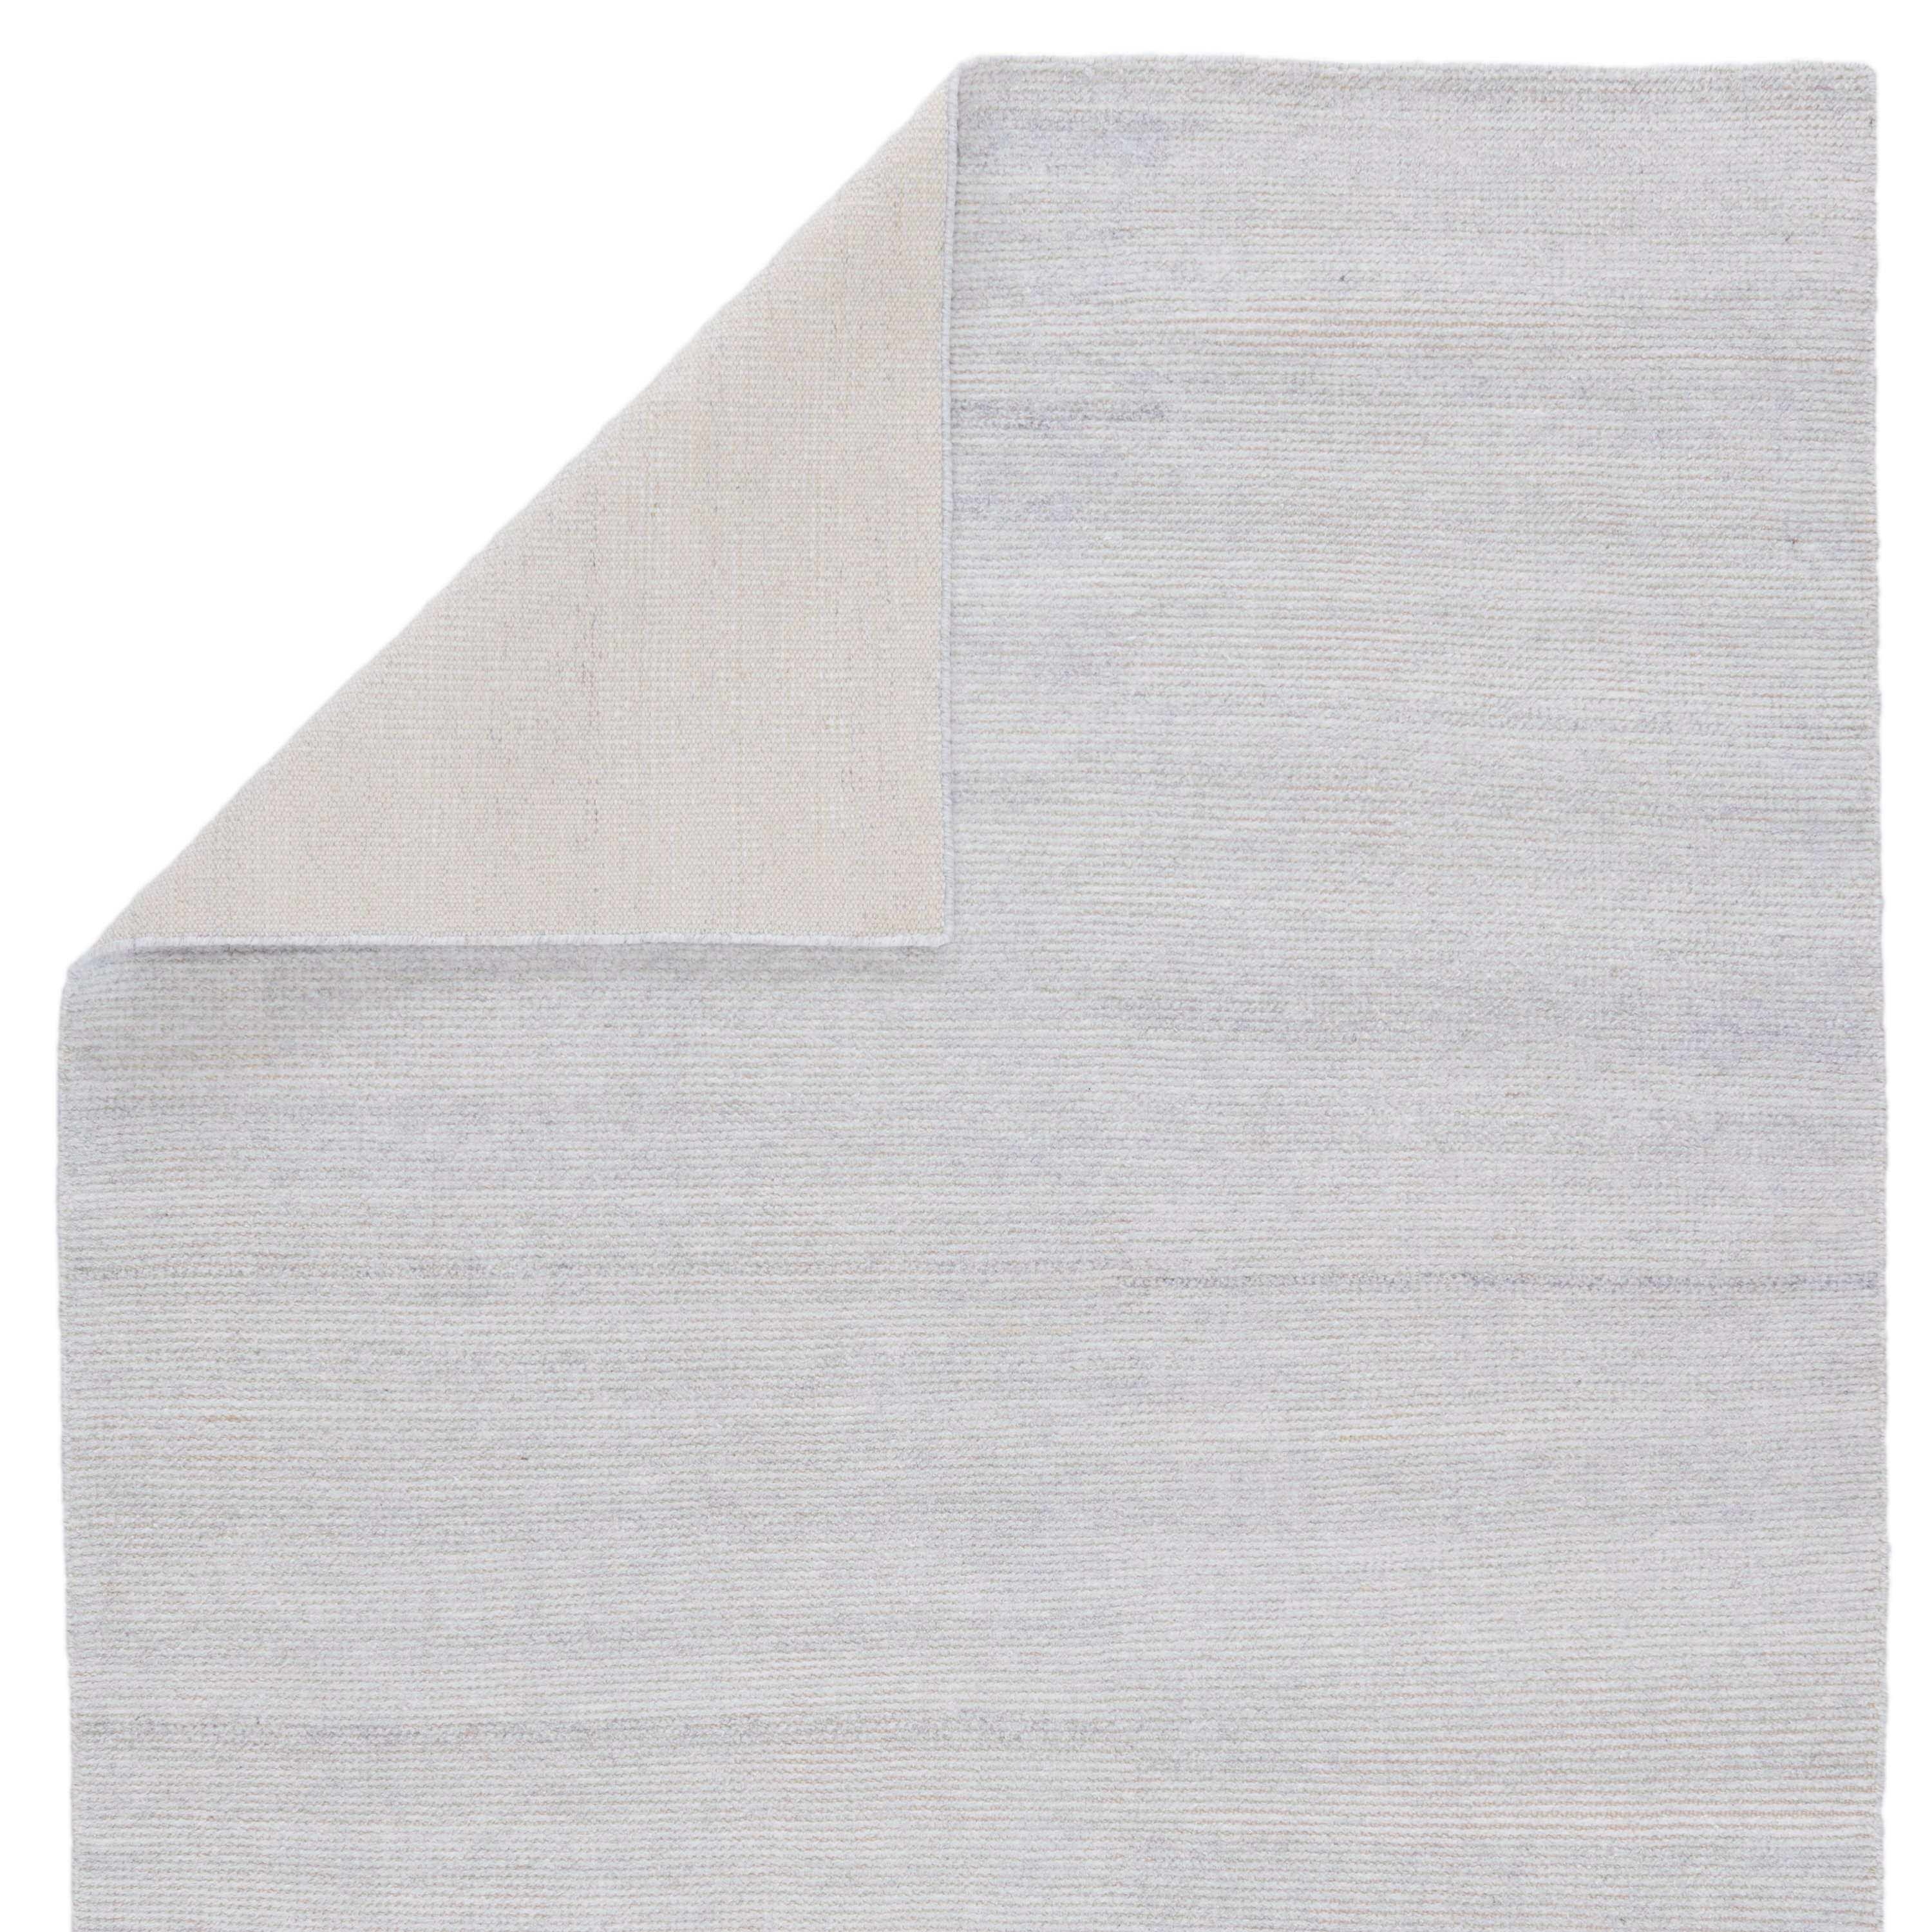 Limon Indoor/ Outdoor Solid White Area Rug. 7'10" X 10'10" - Image 2